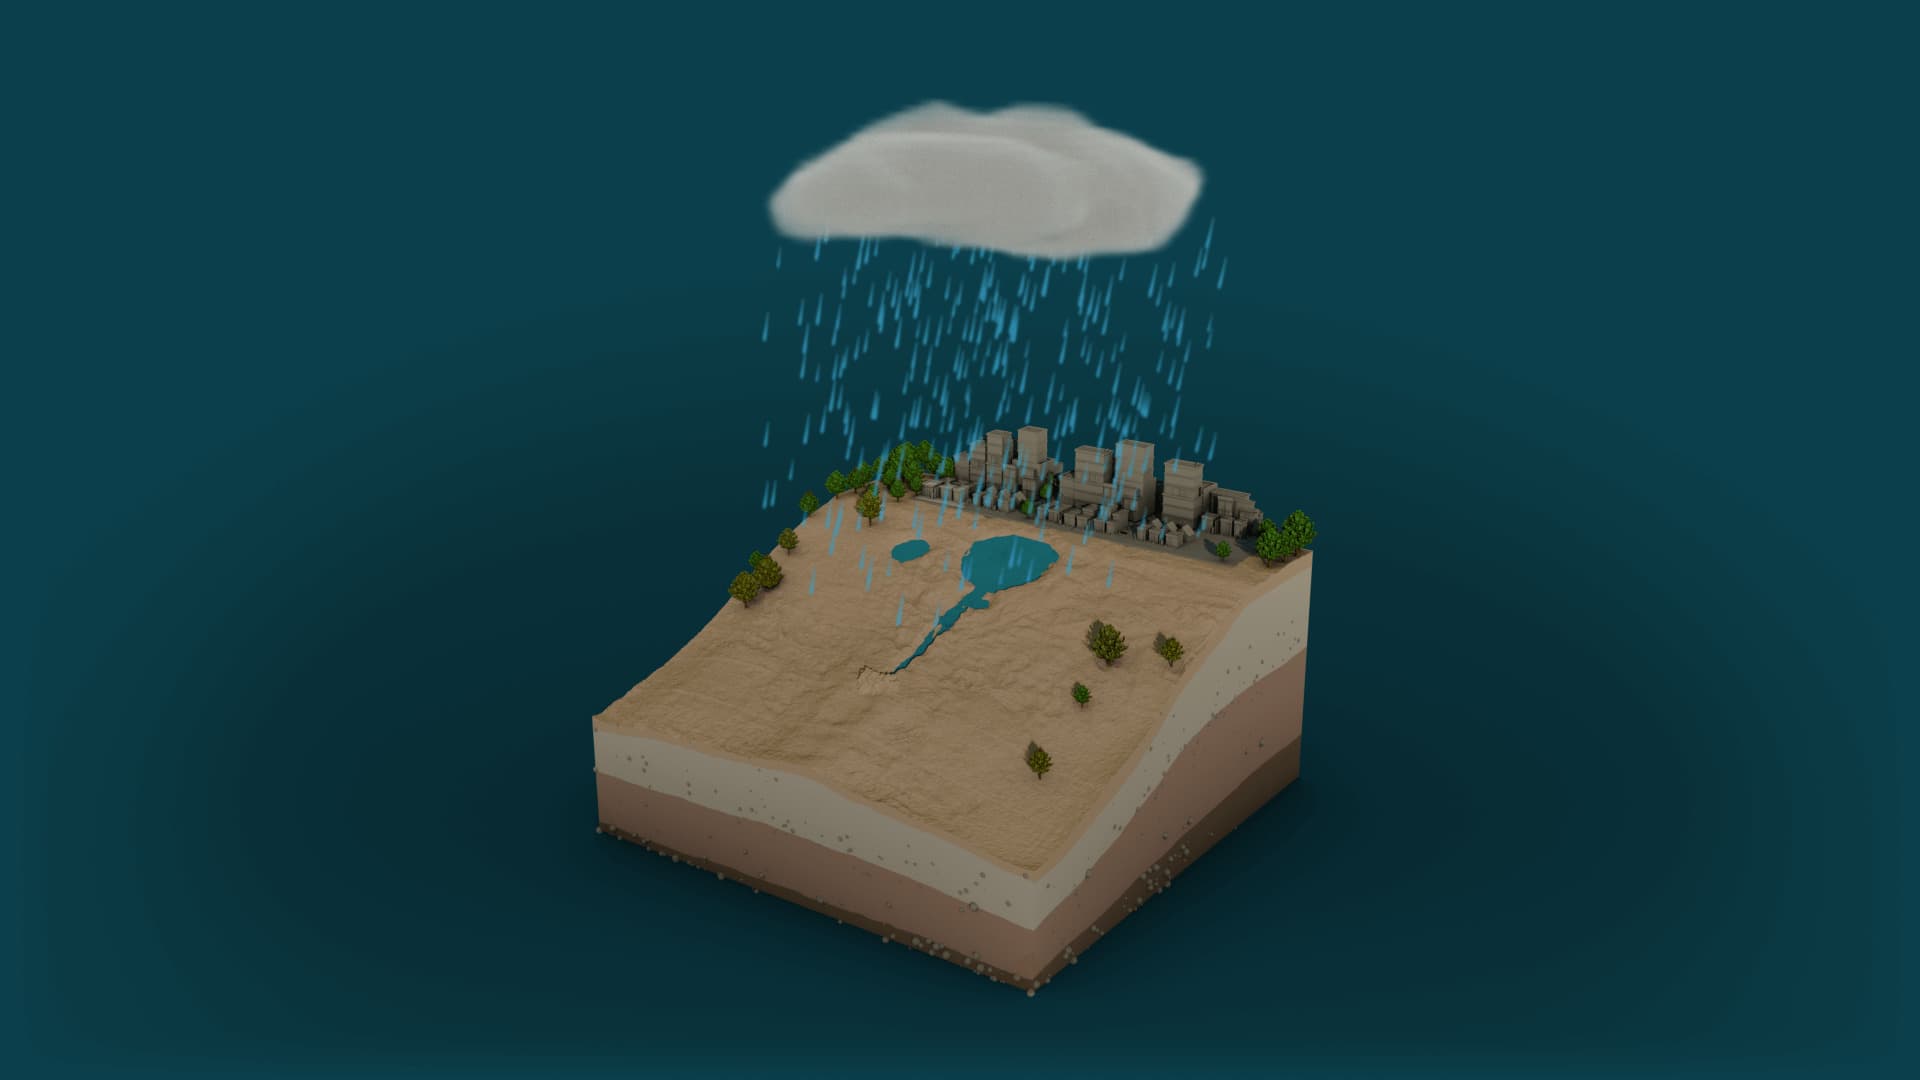 Animation showing streams being formed